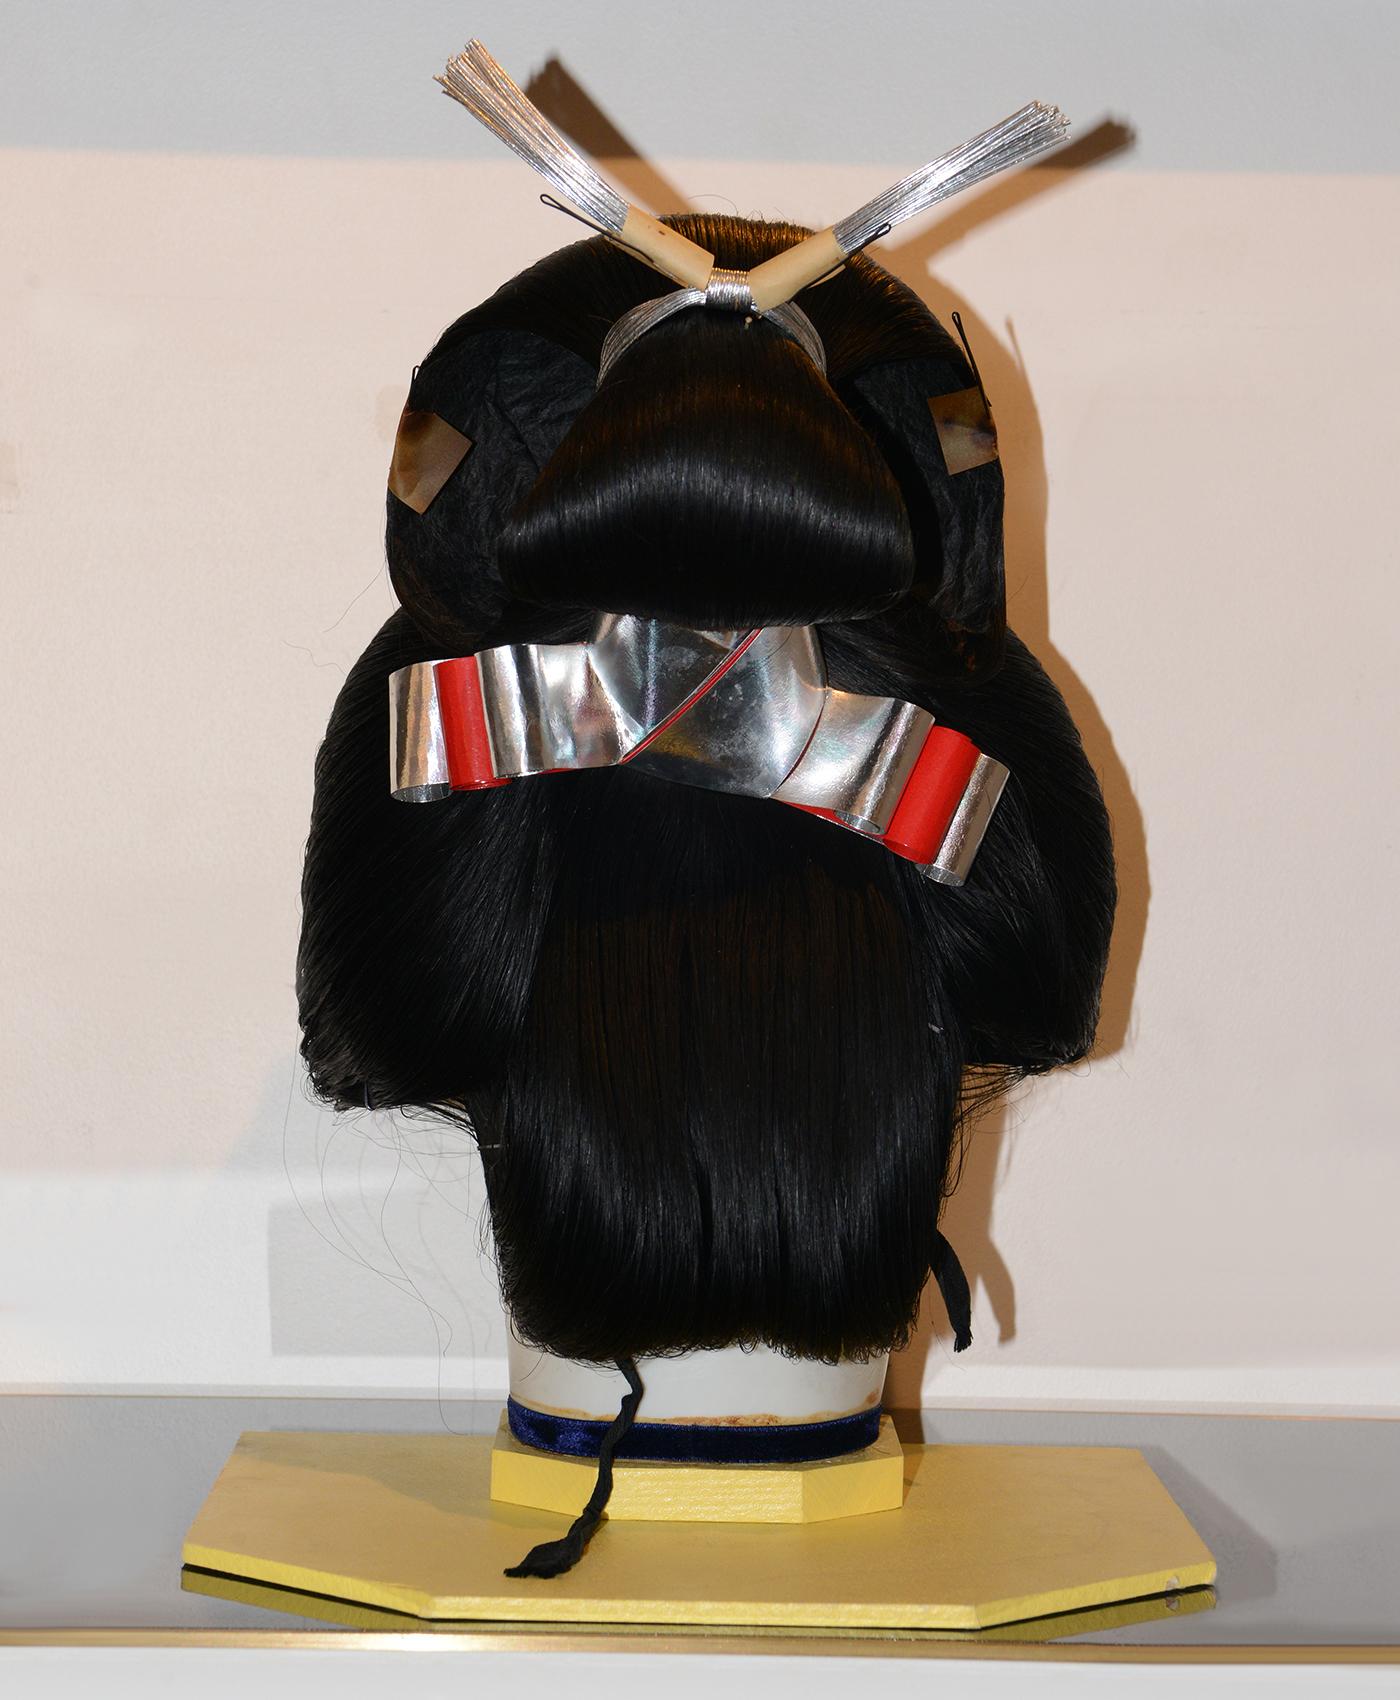 Carved Geisha Wig & Nô Theater 1 Mask For Sale